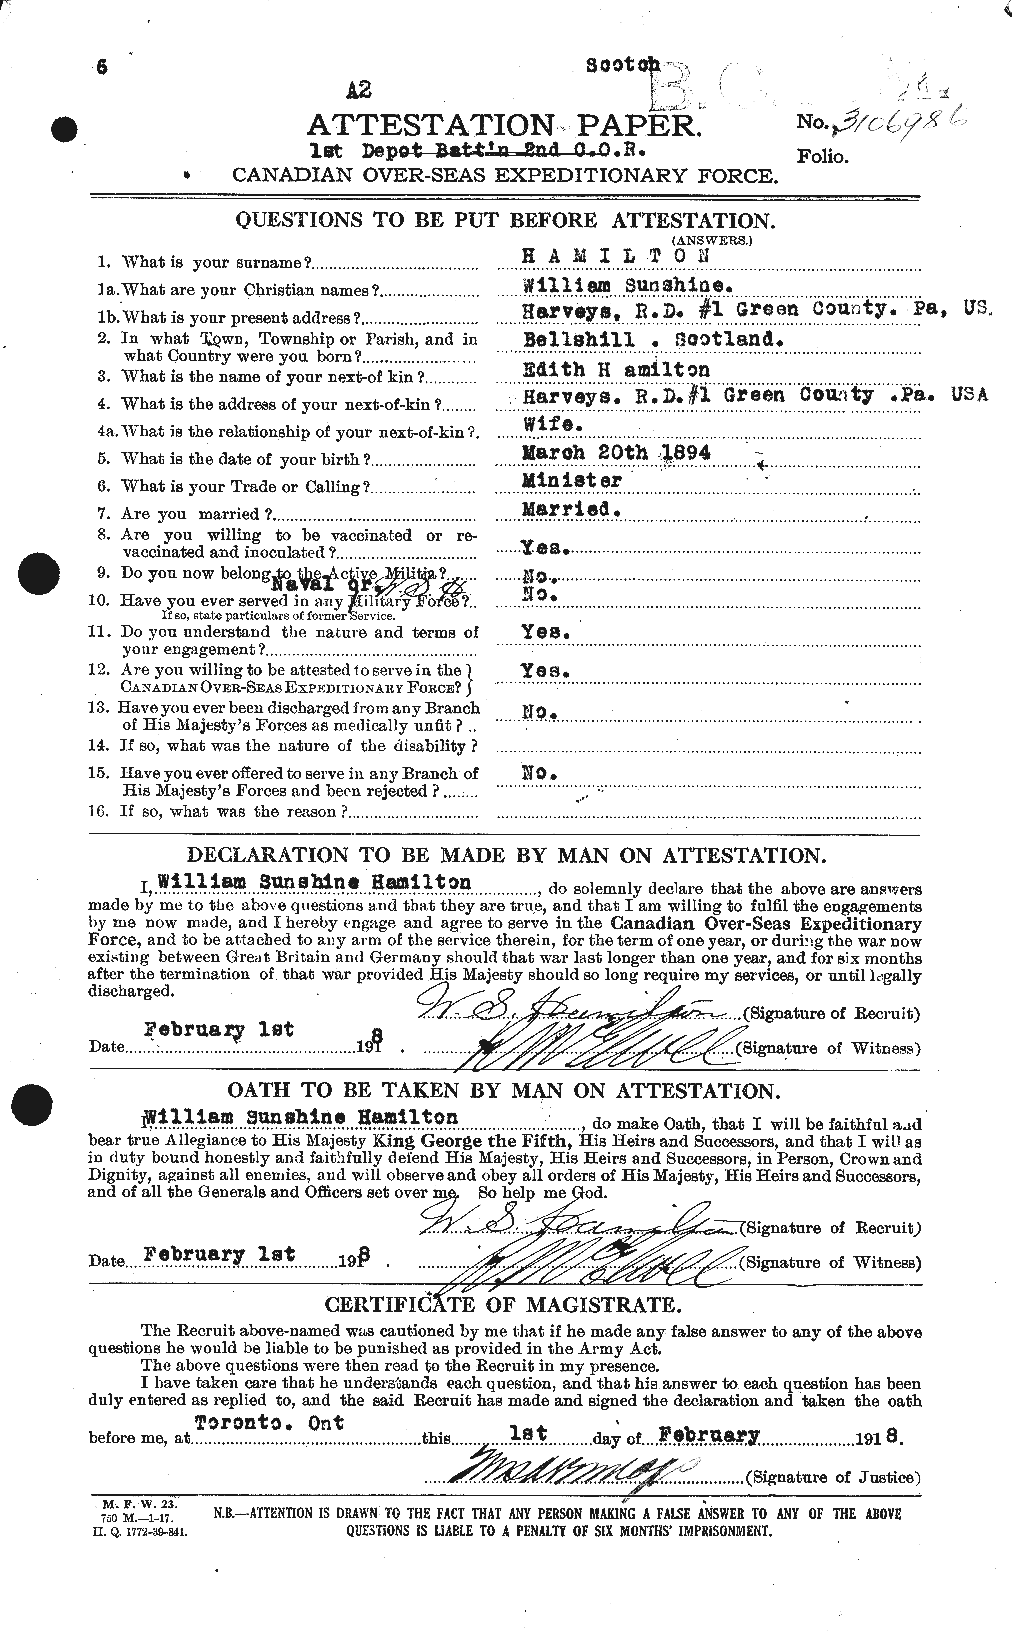 Personnel Records of the First World War - CEF 374929a